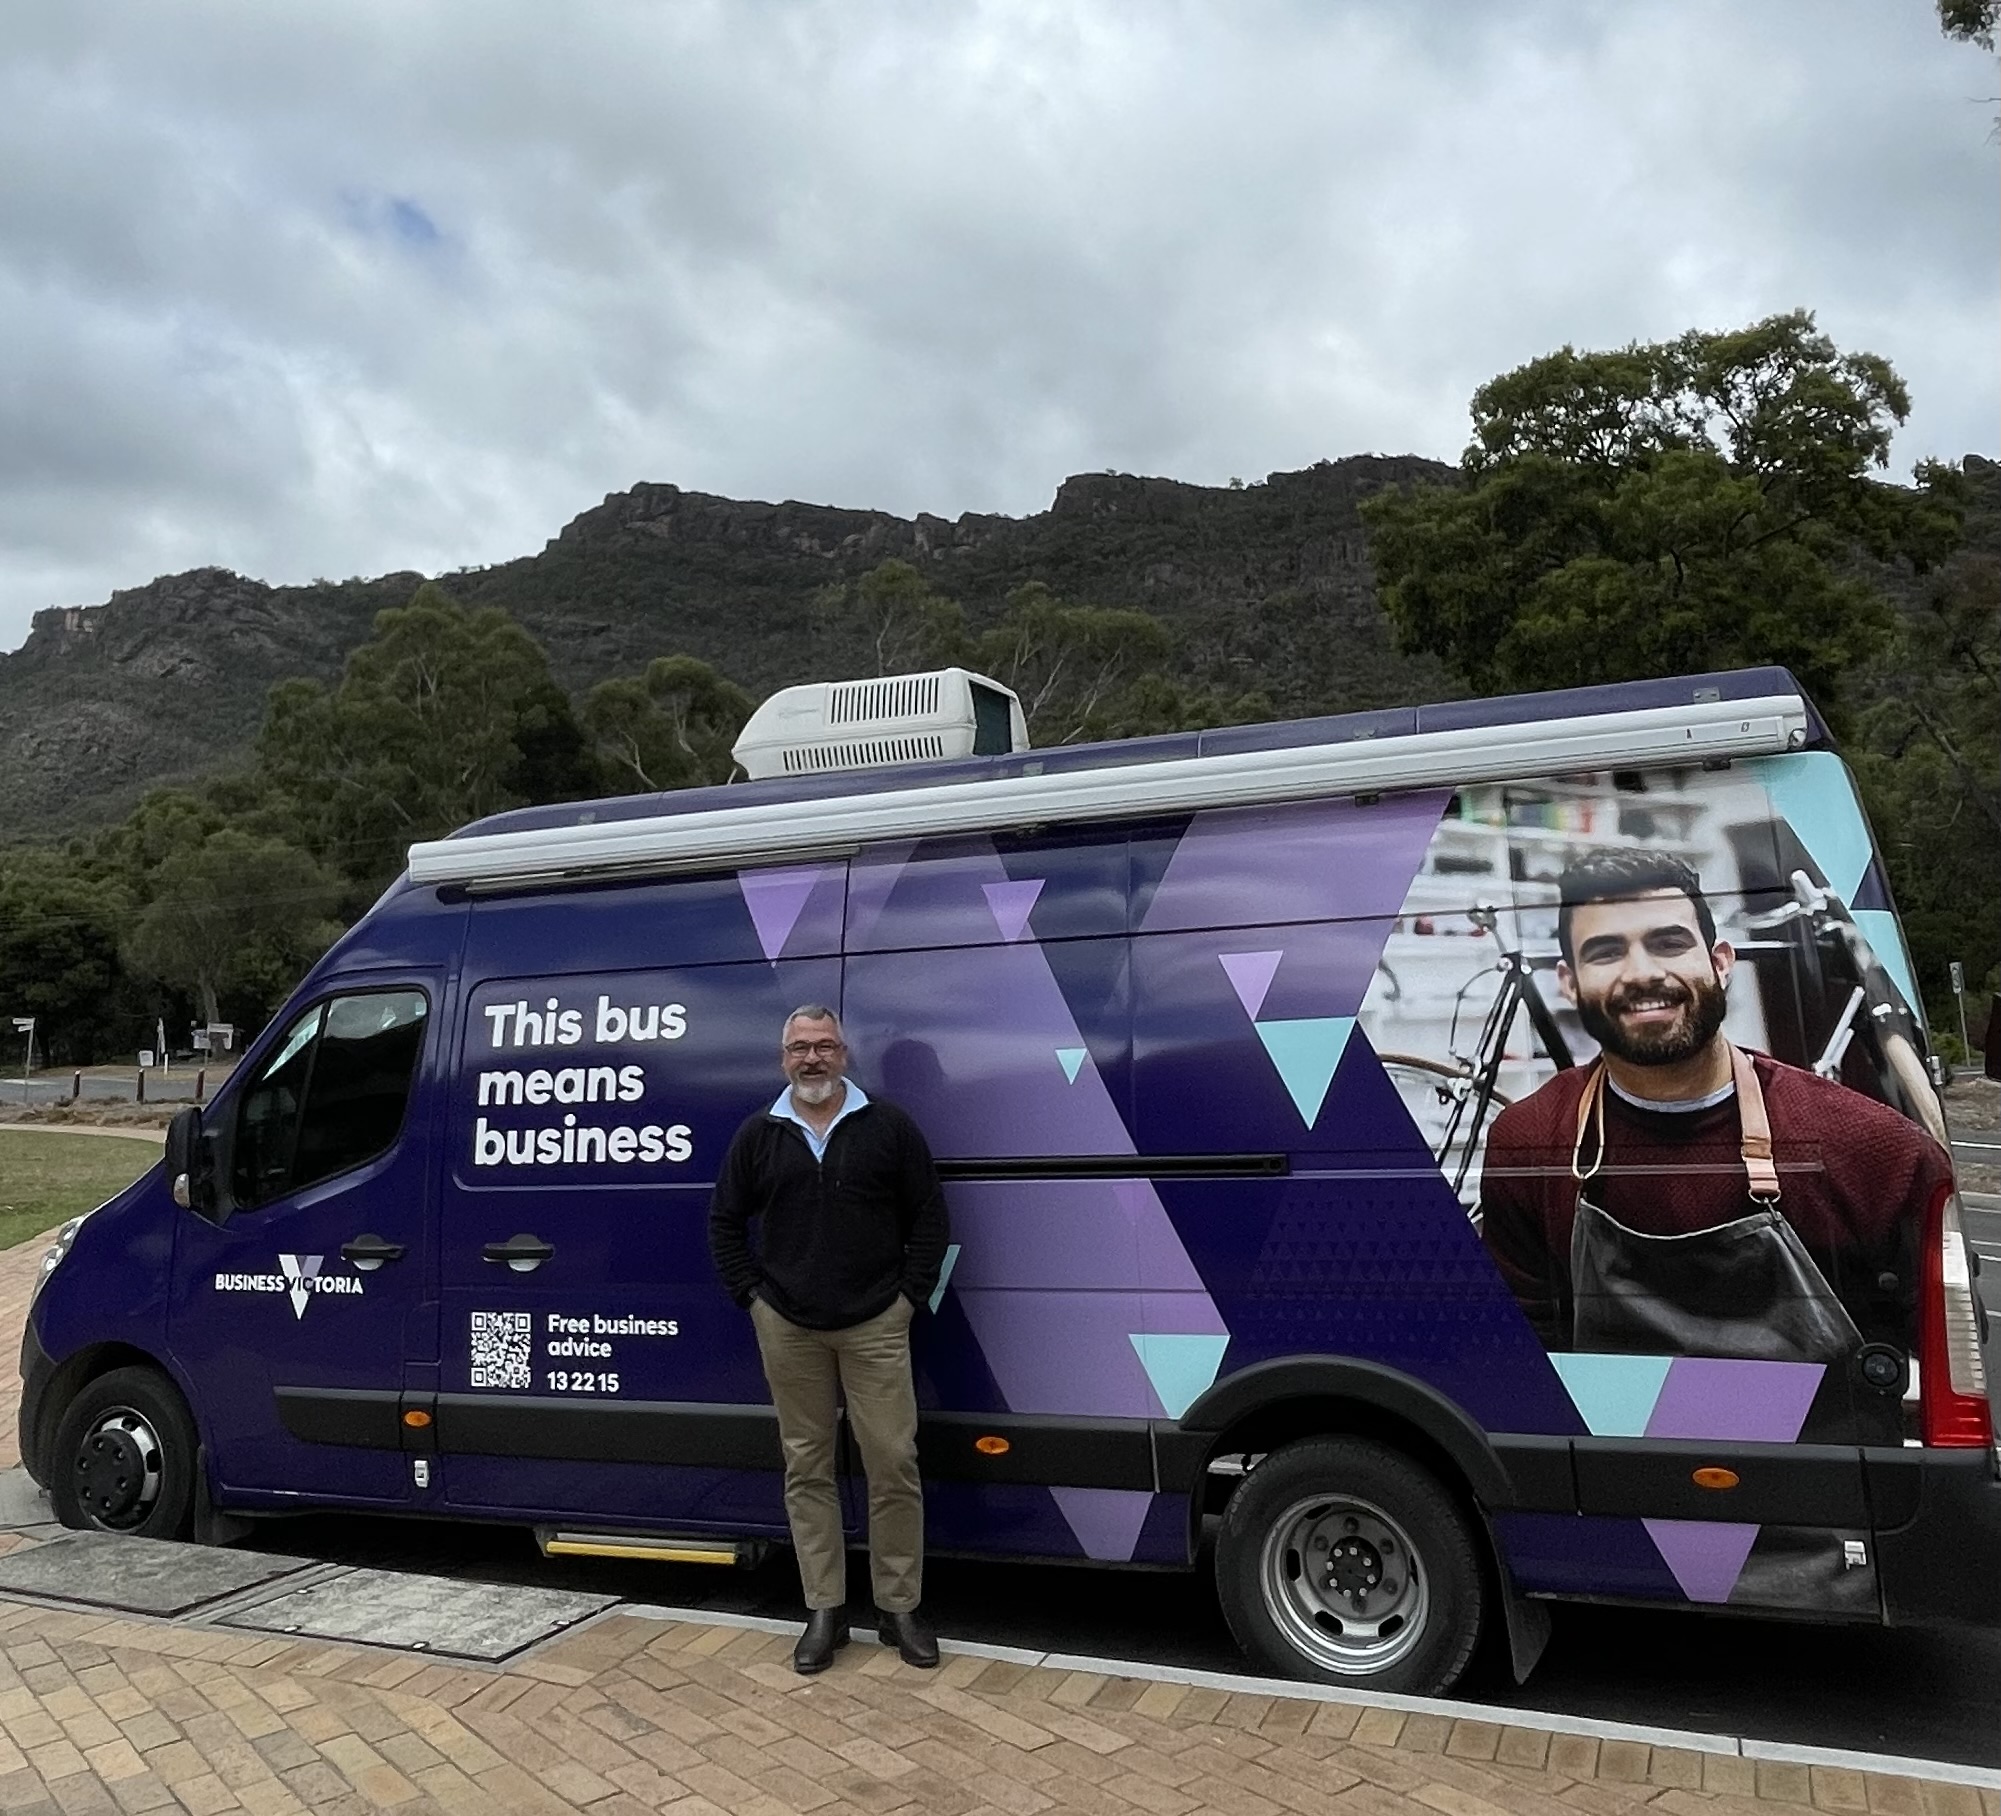 A man standing in front of a purple bus, posing, with an image of a man in a red shirt to the right. The sky is cloudy.